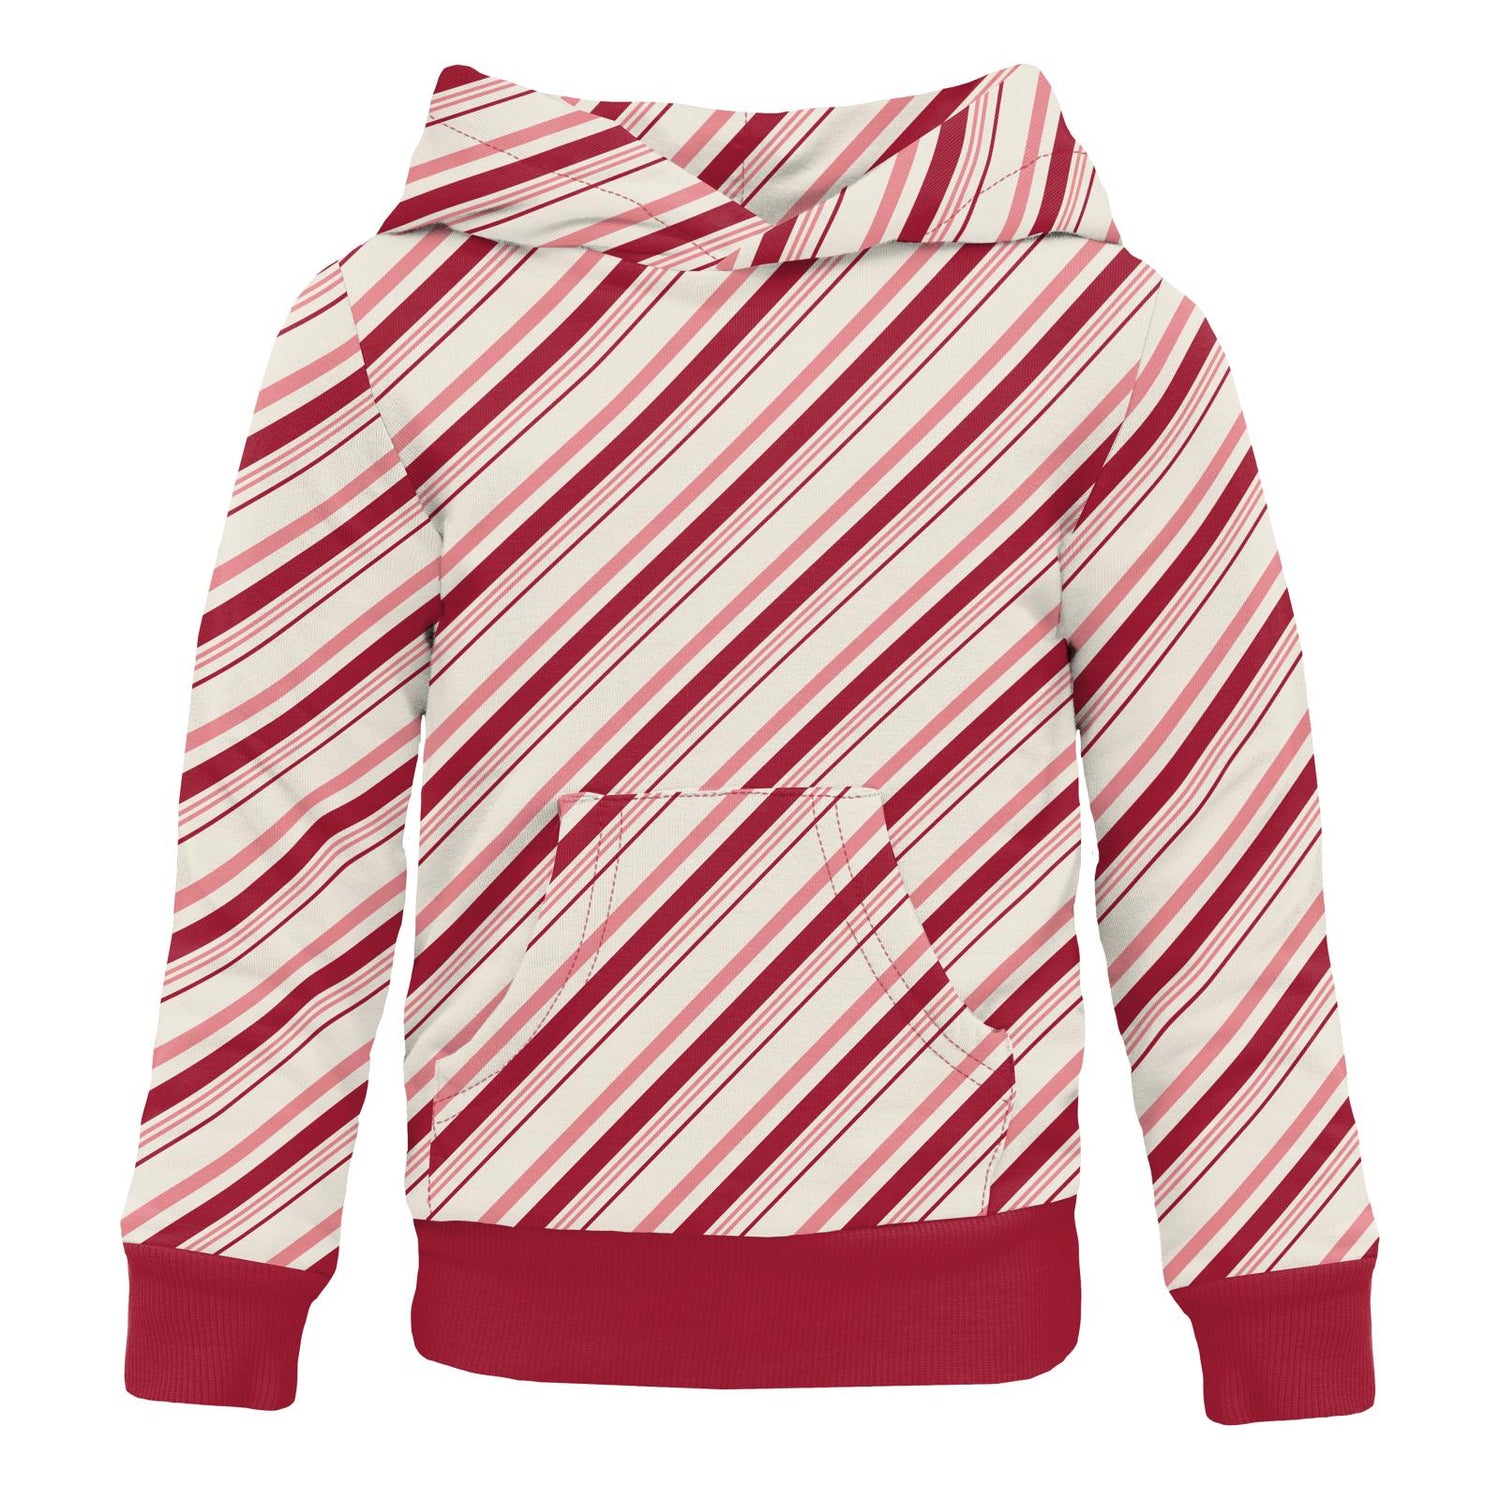 Print Luxe Kangaroo Pocket Pullover in Strawberry Candy Cane Stripe